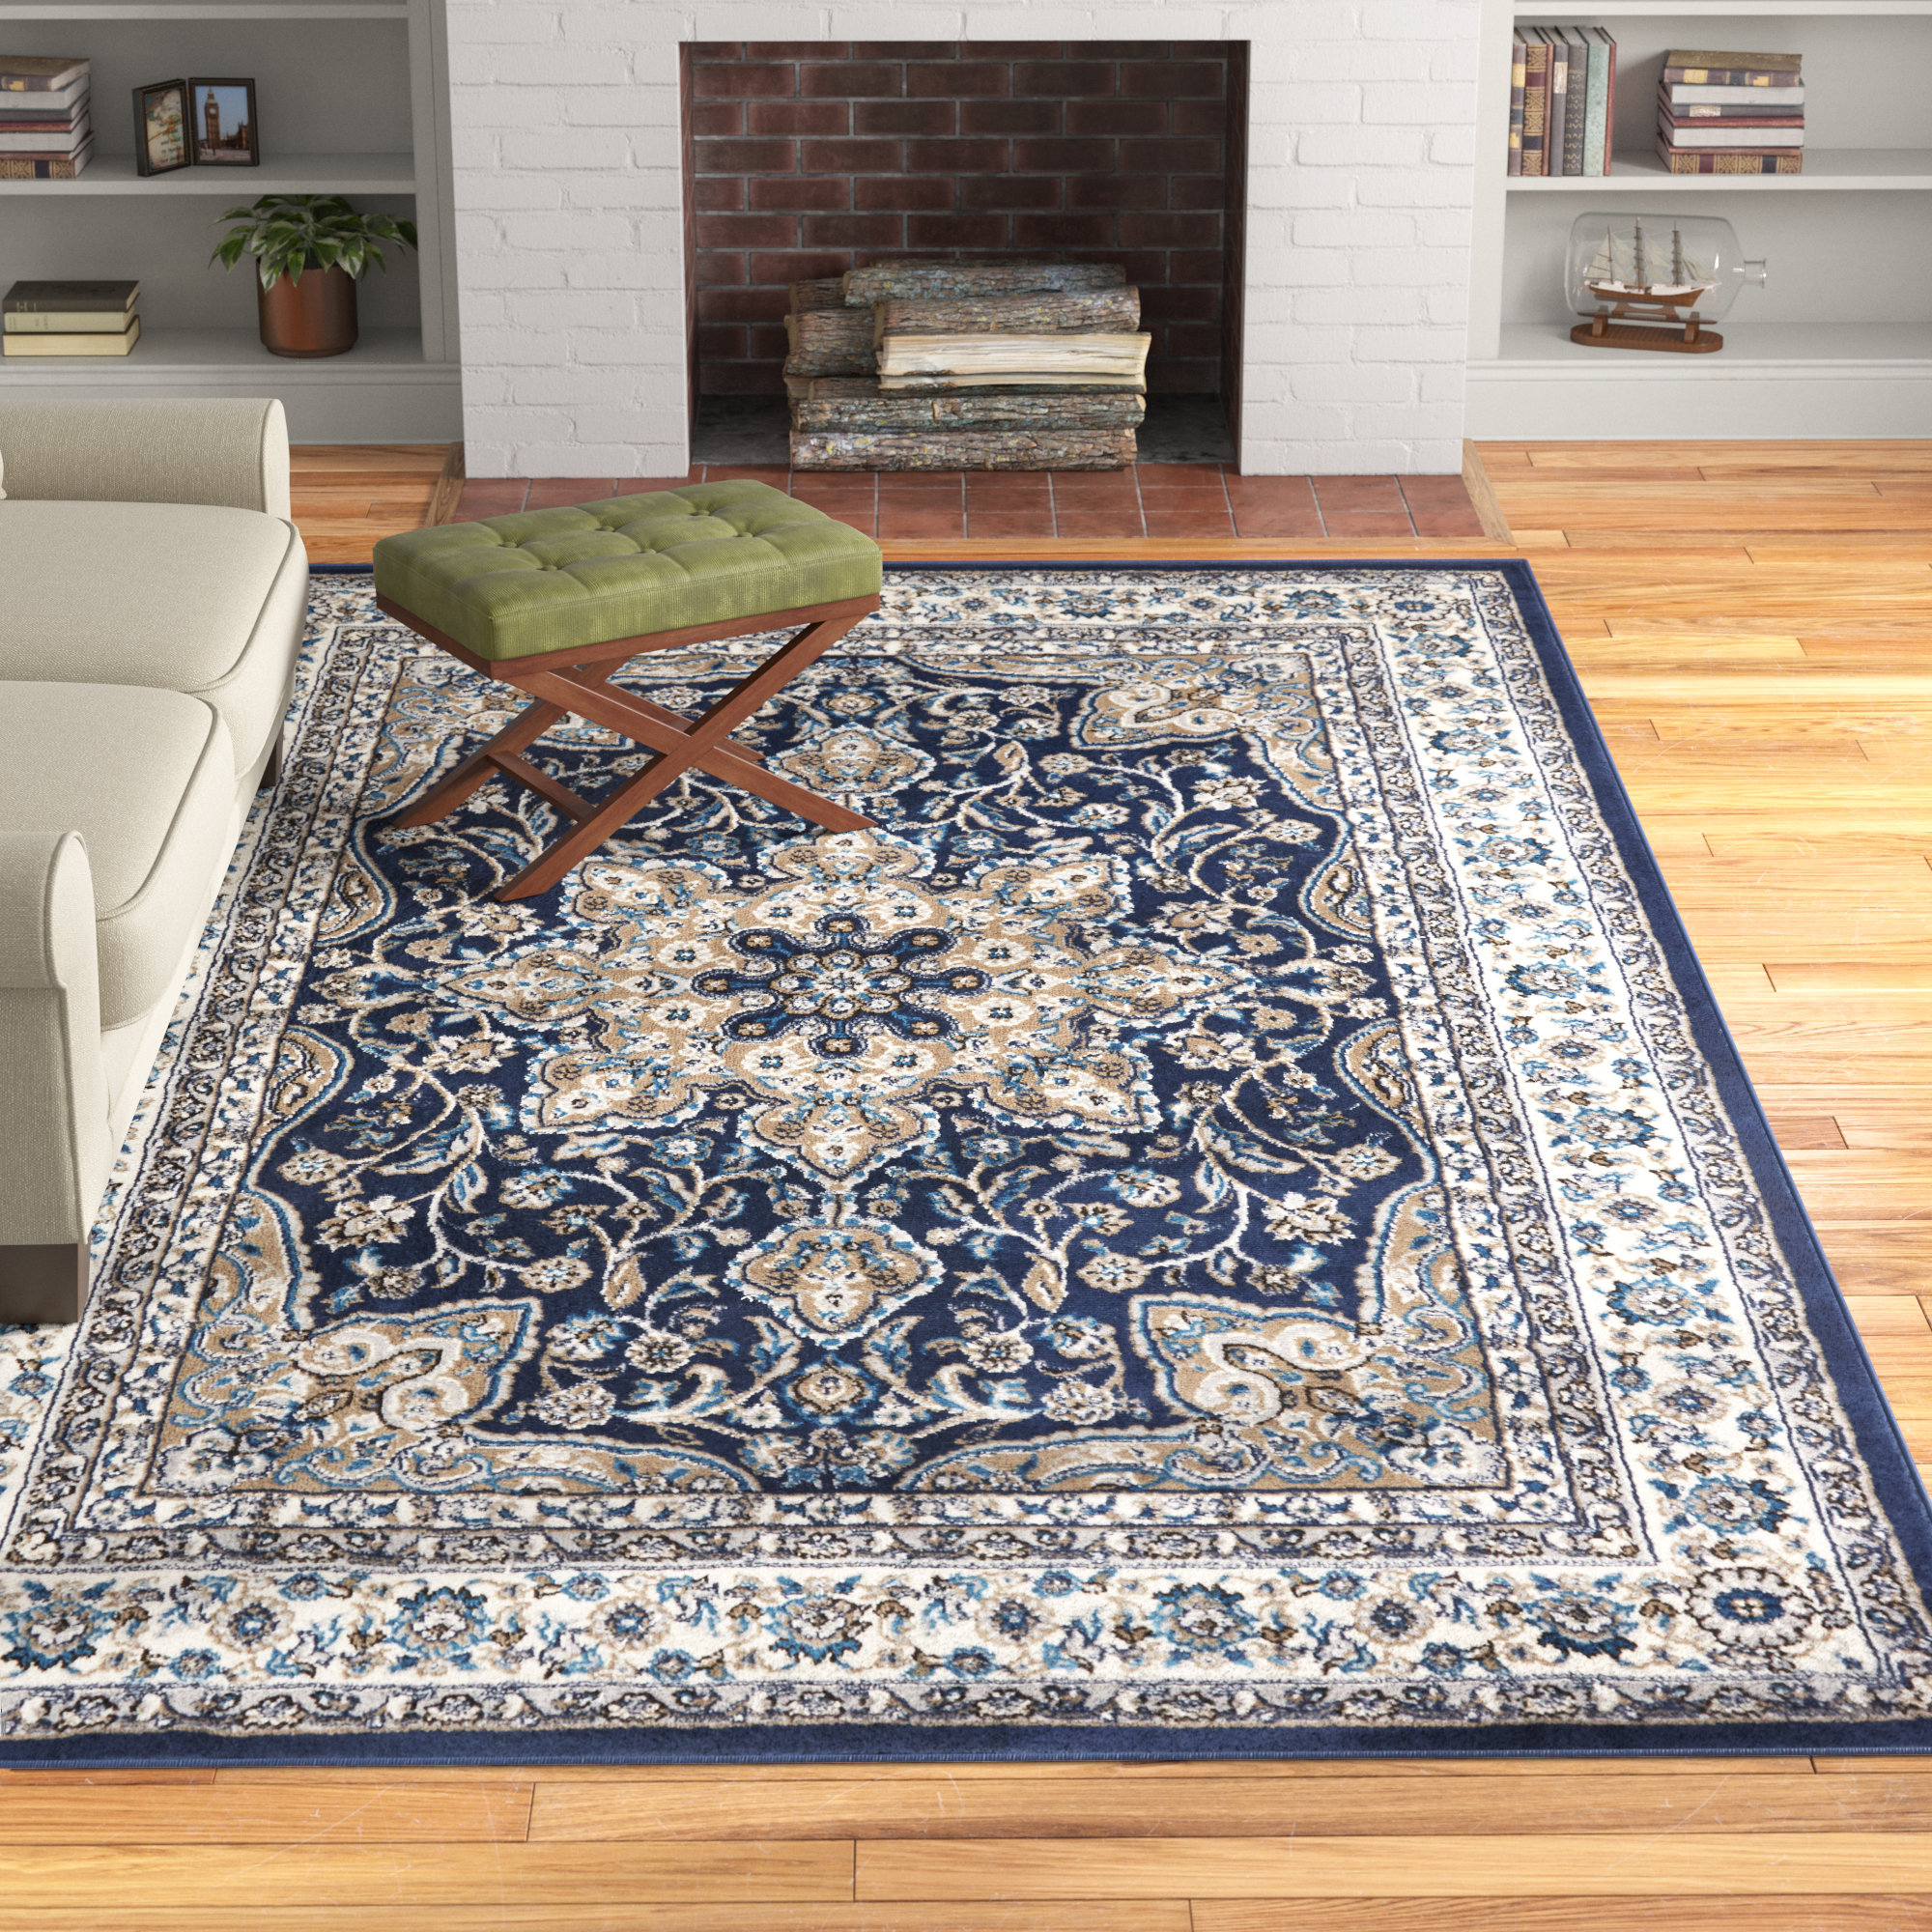 Modern Area Rug Oriental Style Rugs Bedroom Living Room Traditional Carpet Mats 